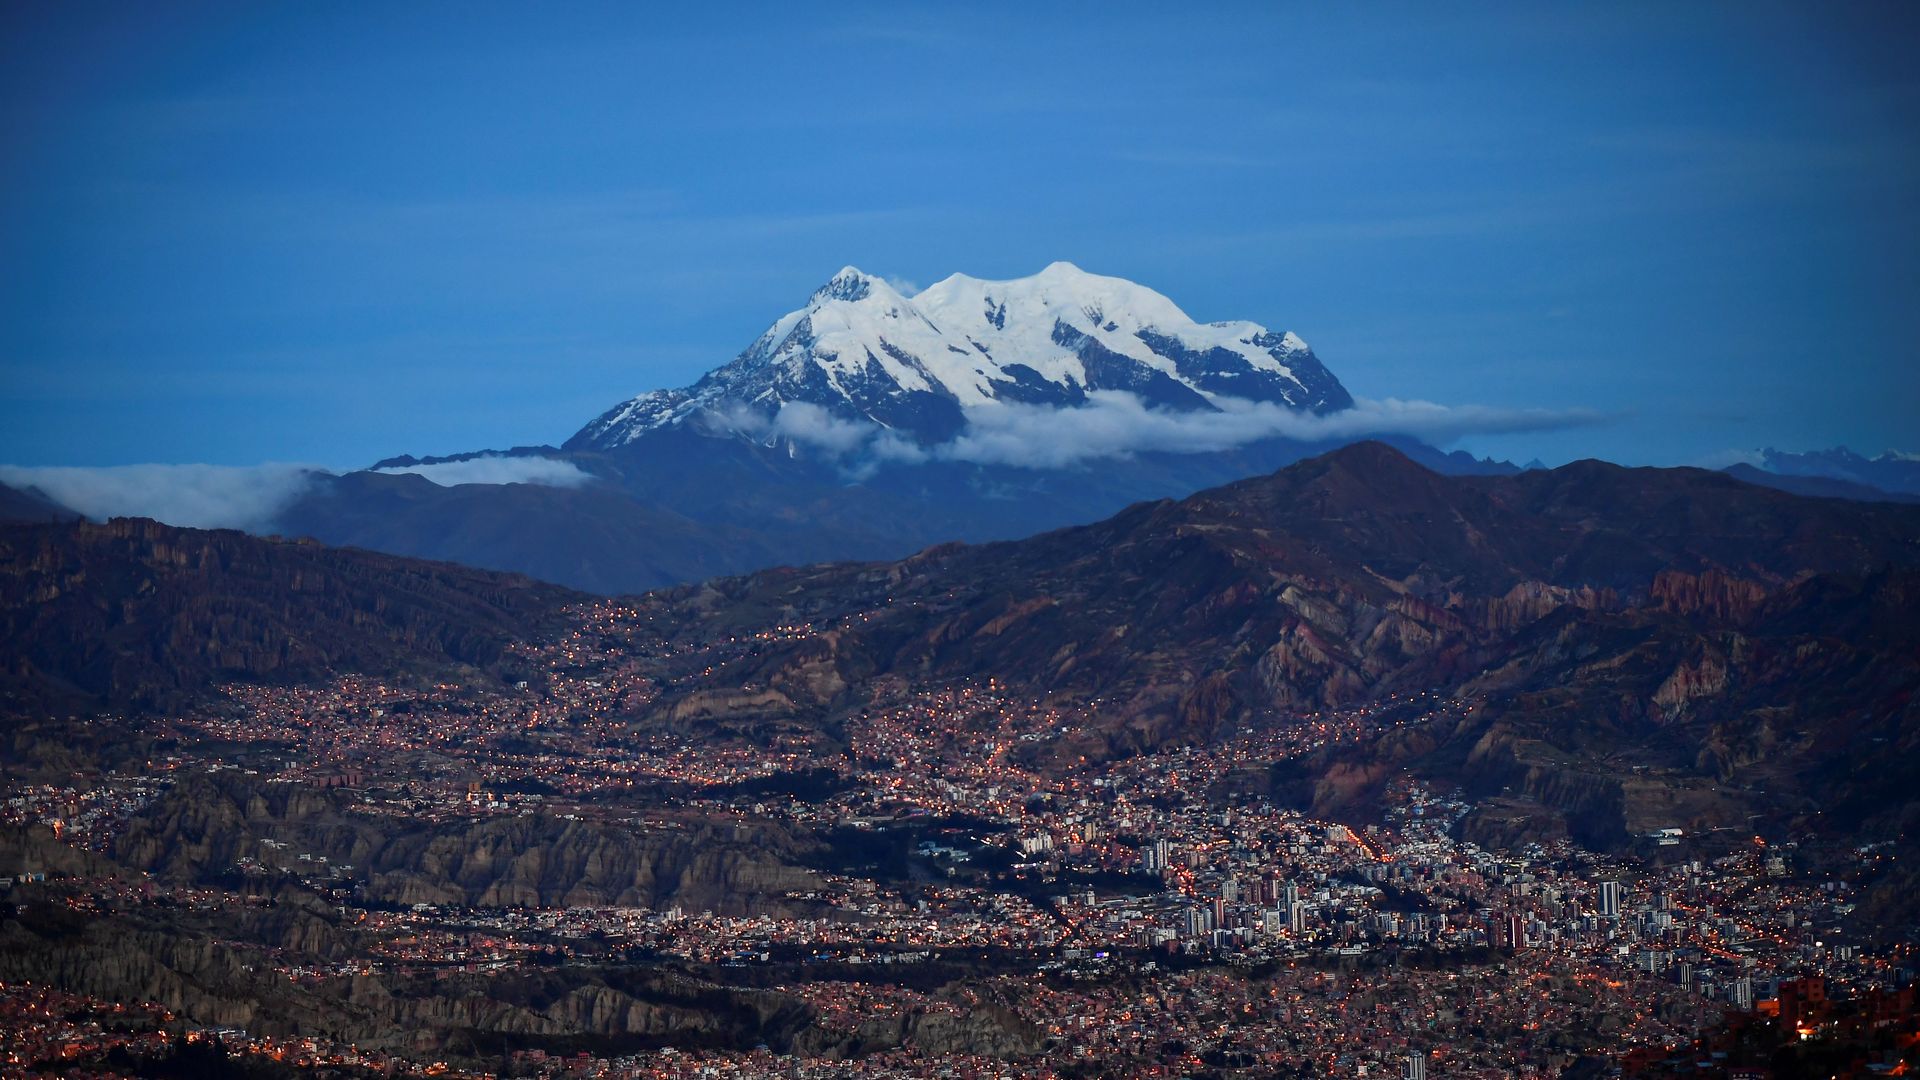 La Paz with a view of Illimani mountain in the background